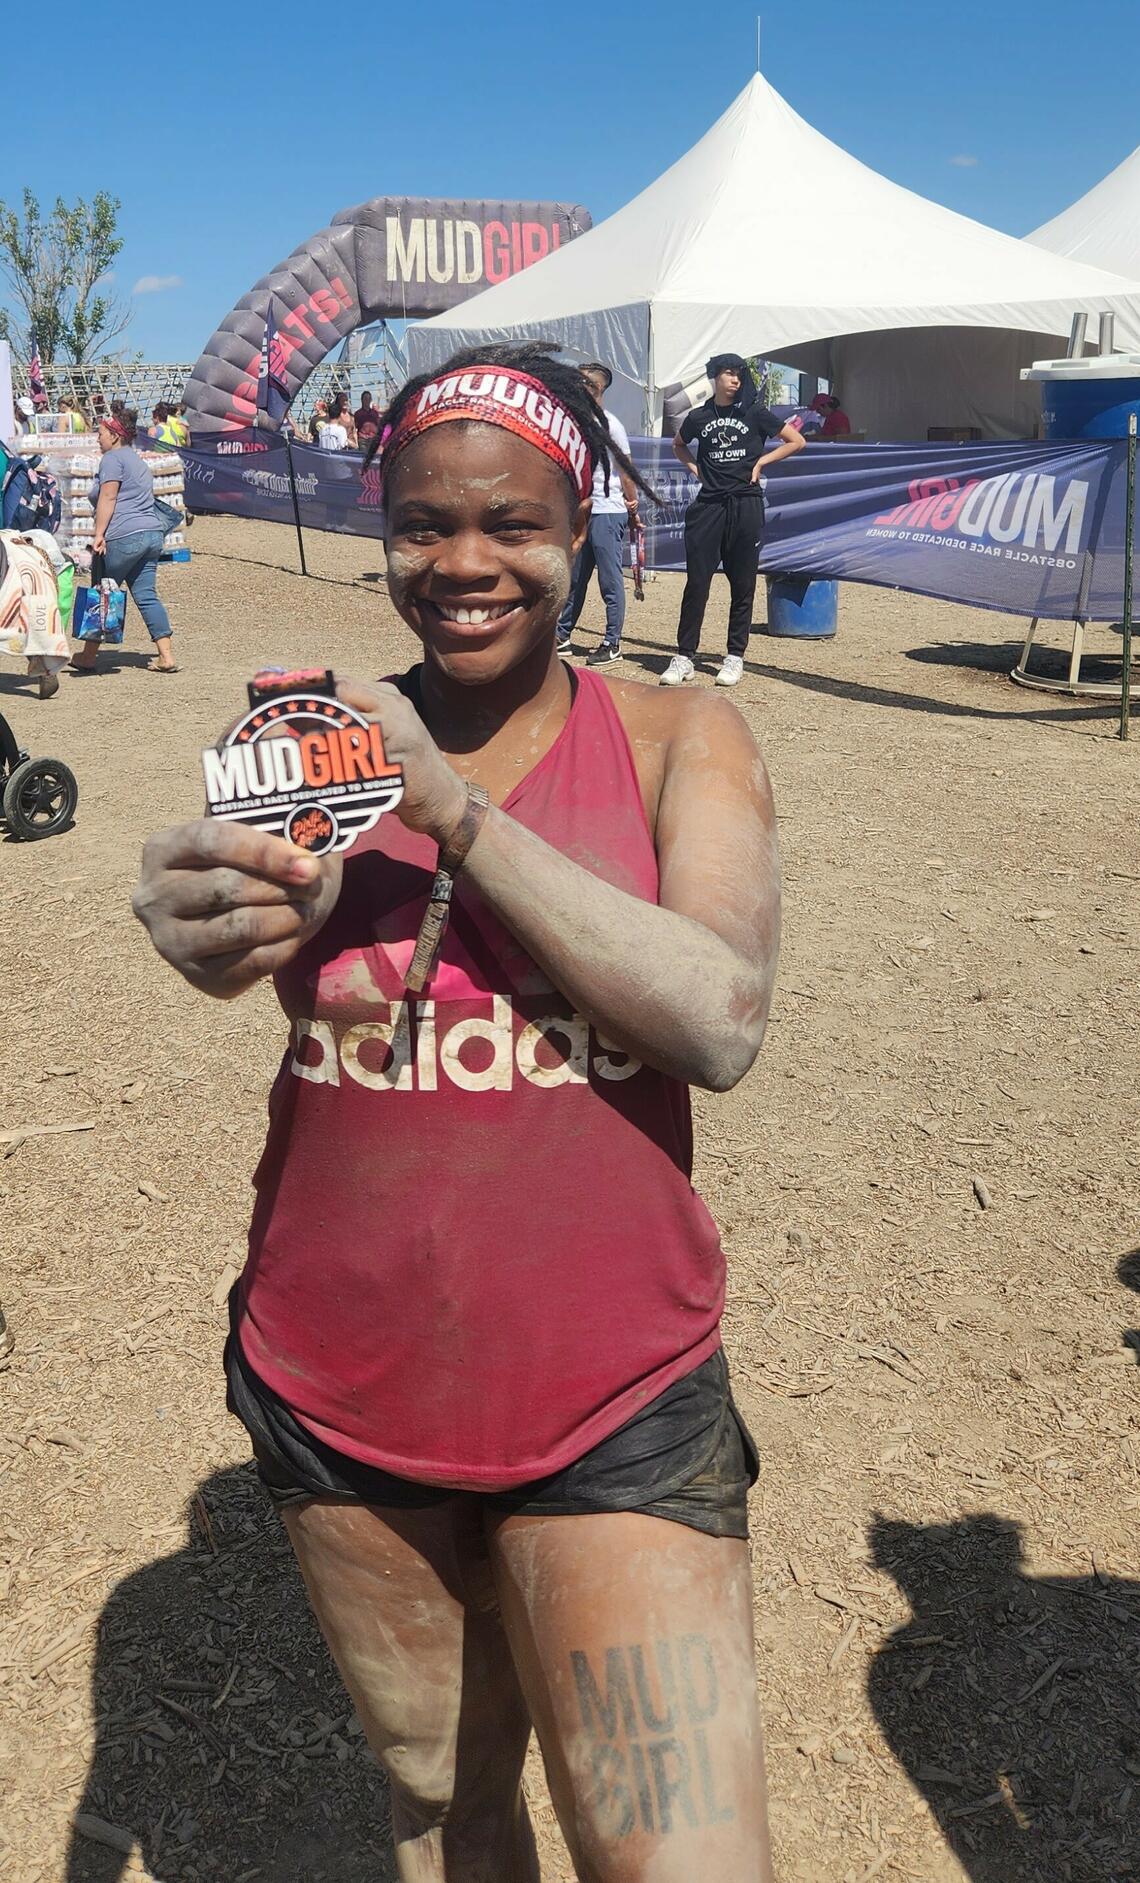 Tolu after participating in the Mudgirl run